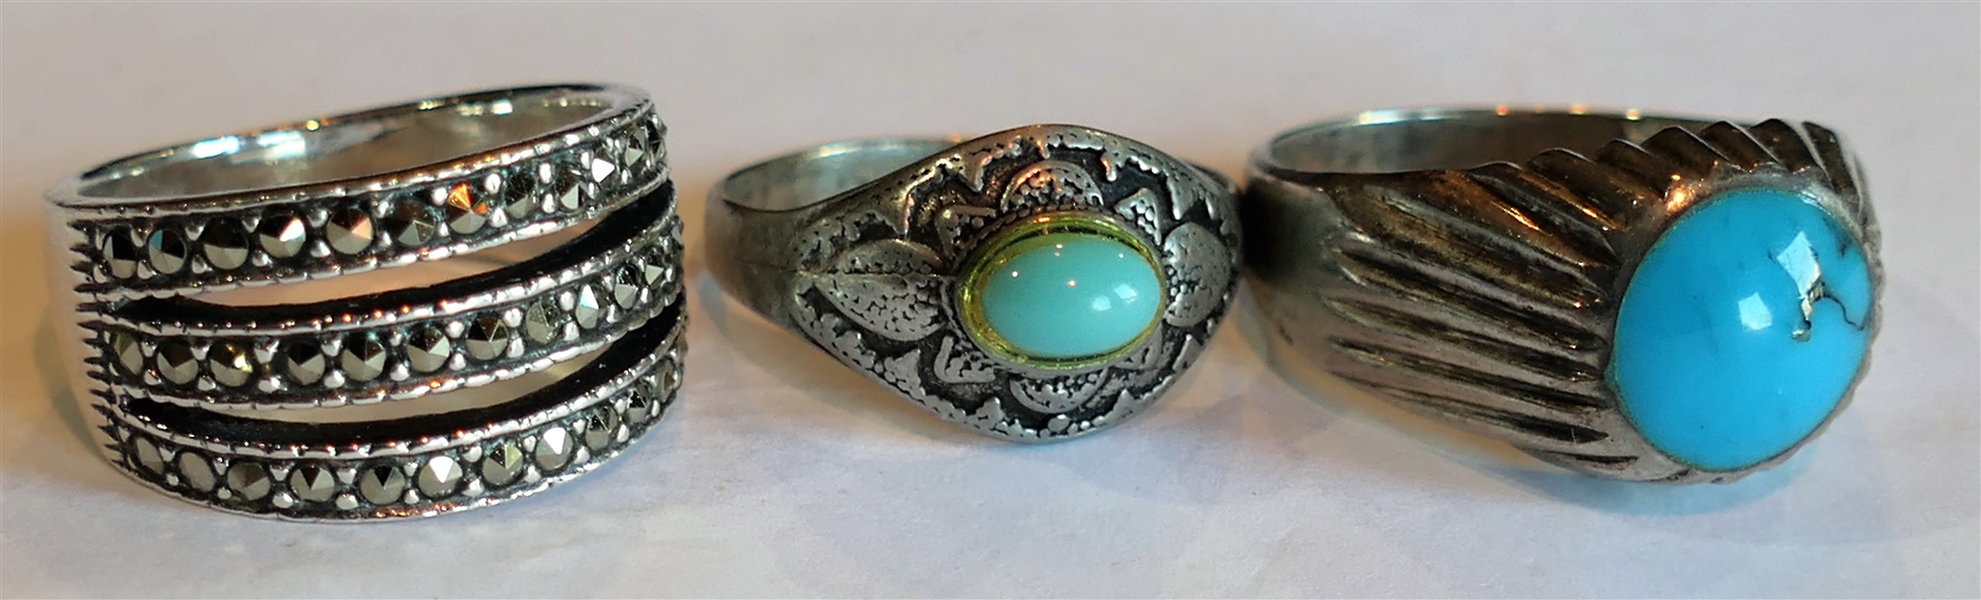 3 Sterling Silver Rings - Turquoise Cabochon Ring Size 8 1/2, Sterling Silver Marcasite Size 7, and Sterling Silver with Small Blue Stone Size 7